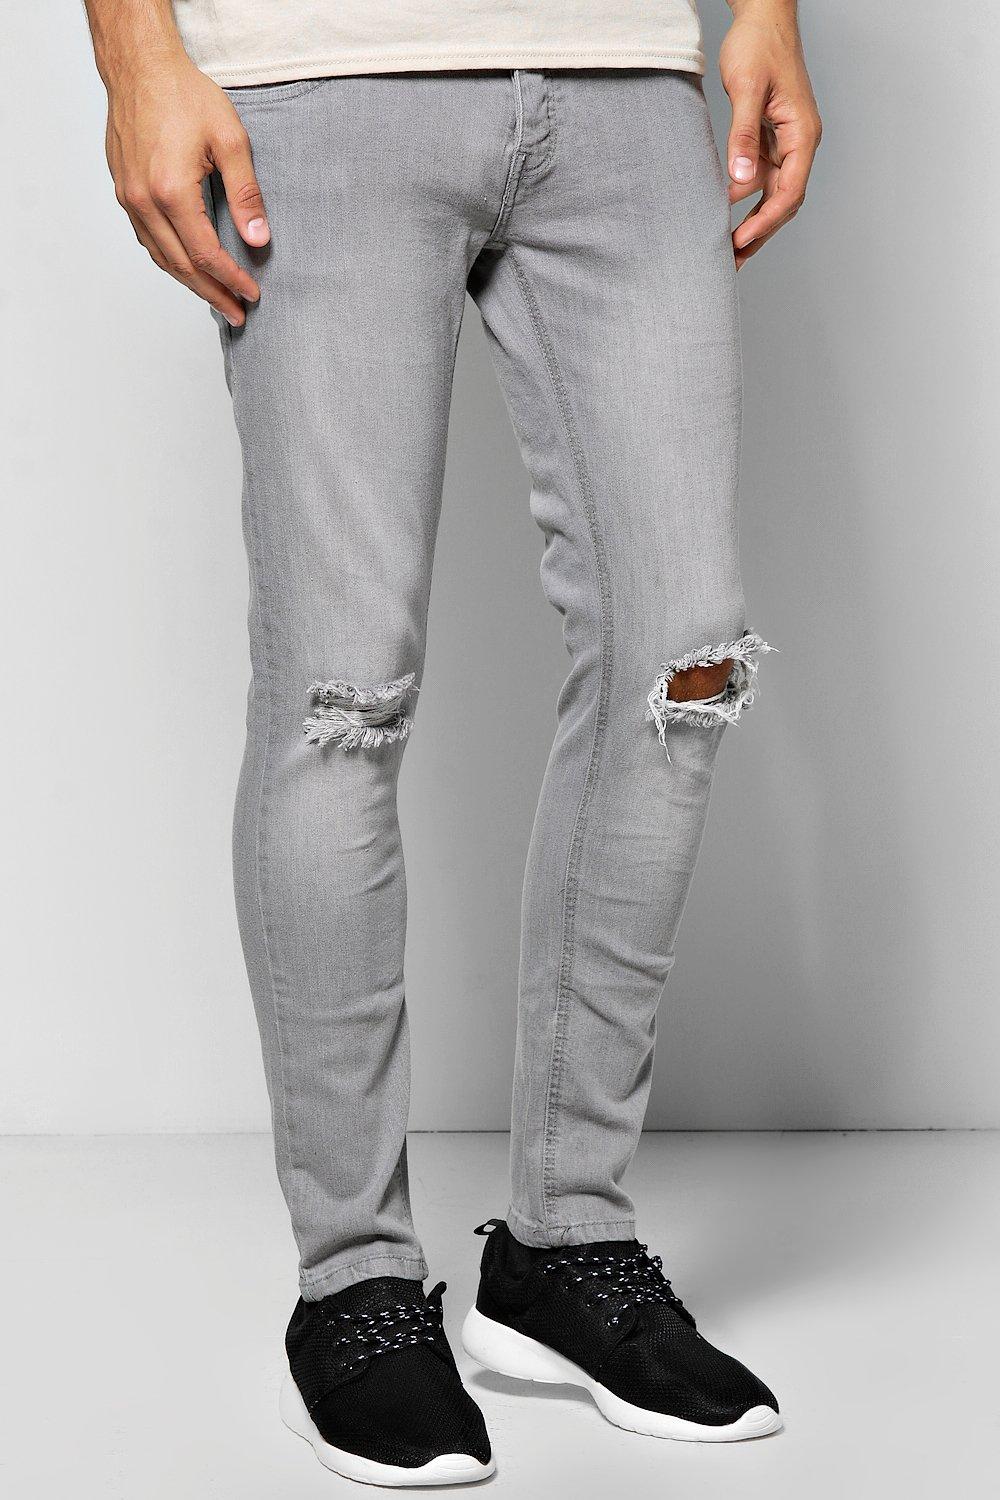 grey distressed jeans